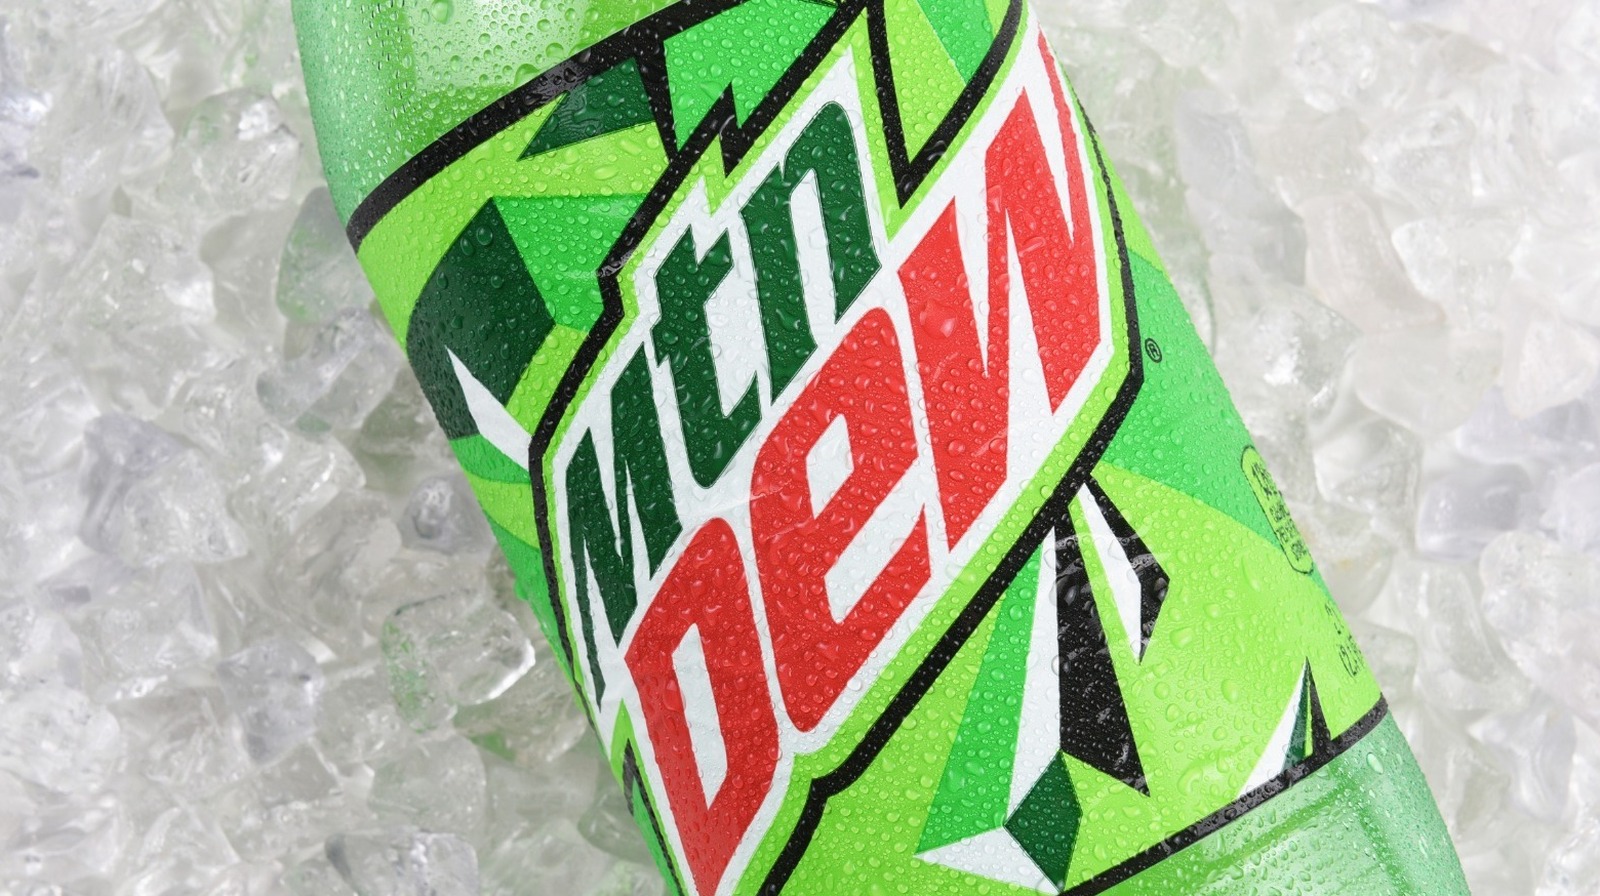 Don’t Believe This Mountain Dew Fertility Myth